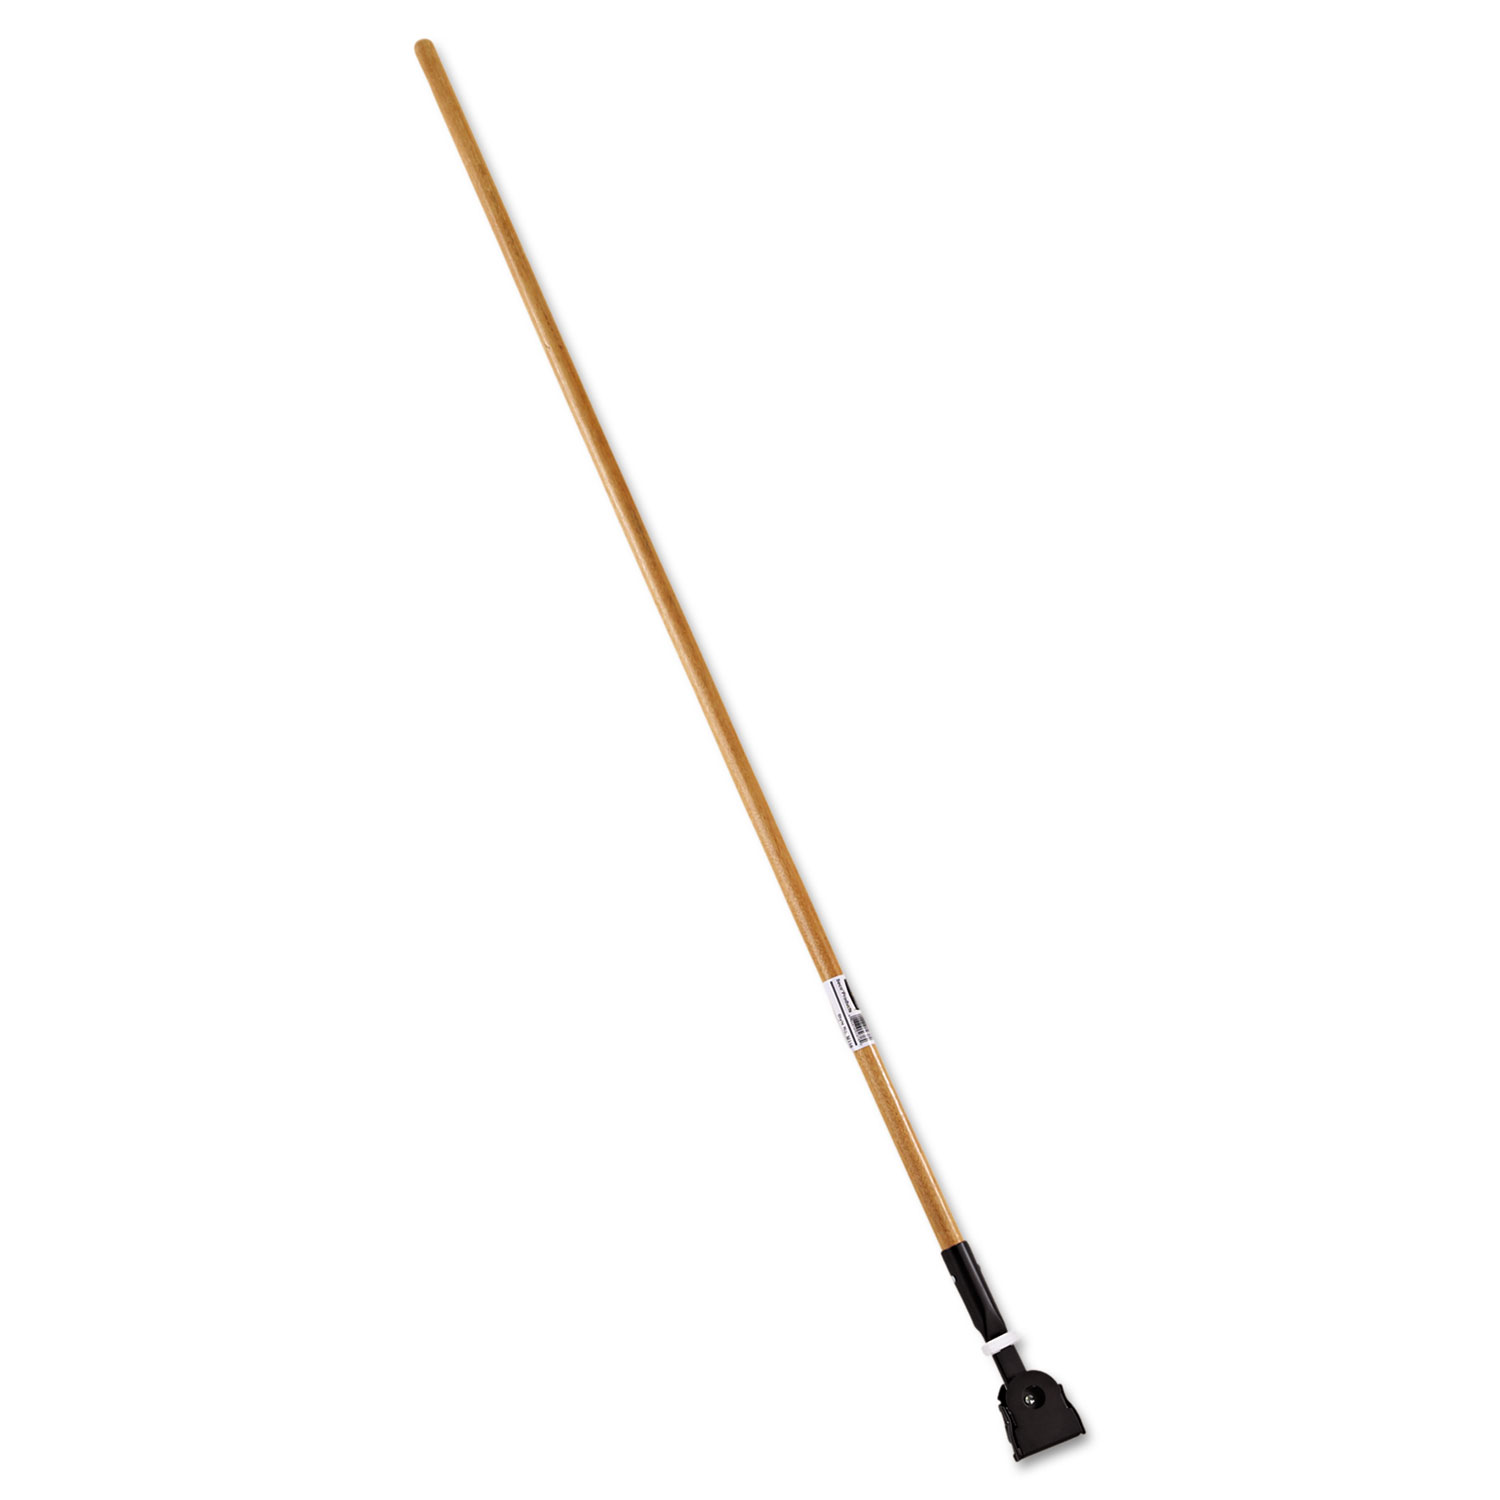  Rubbermaid Commercial FGM116000000 Snap-On Hardwood Dust Mop Handle, 1 1/2 dia x 60, Natural (RCPM116) 